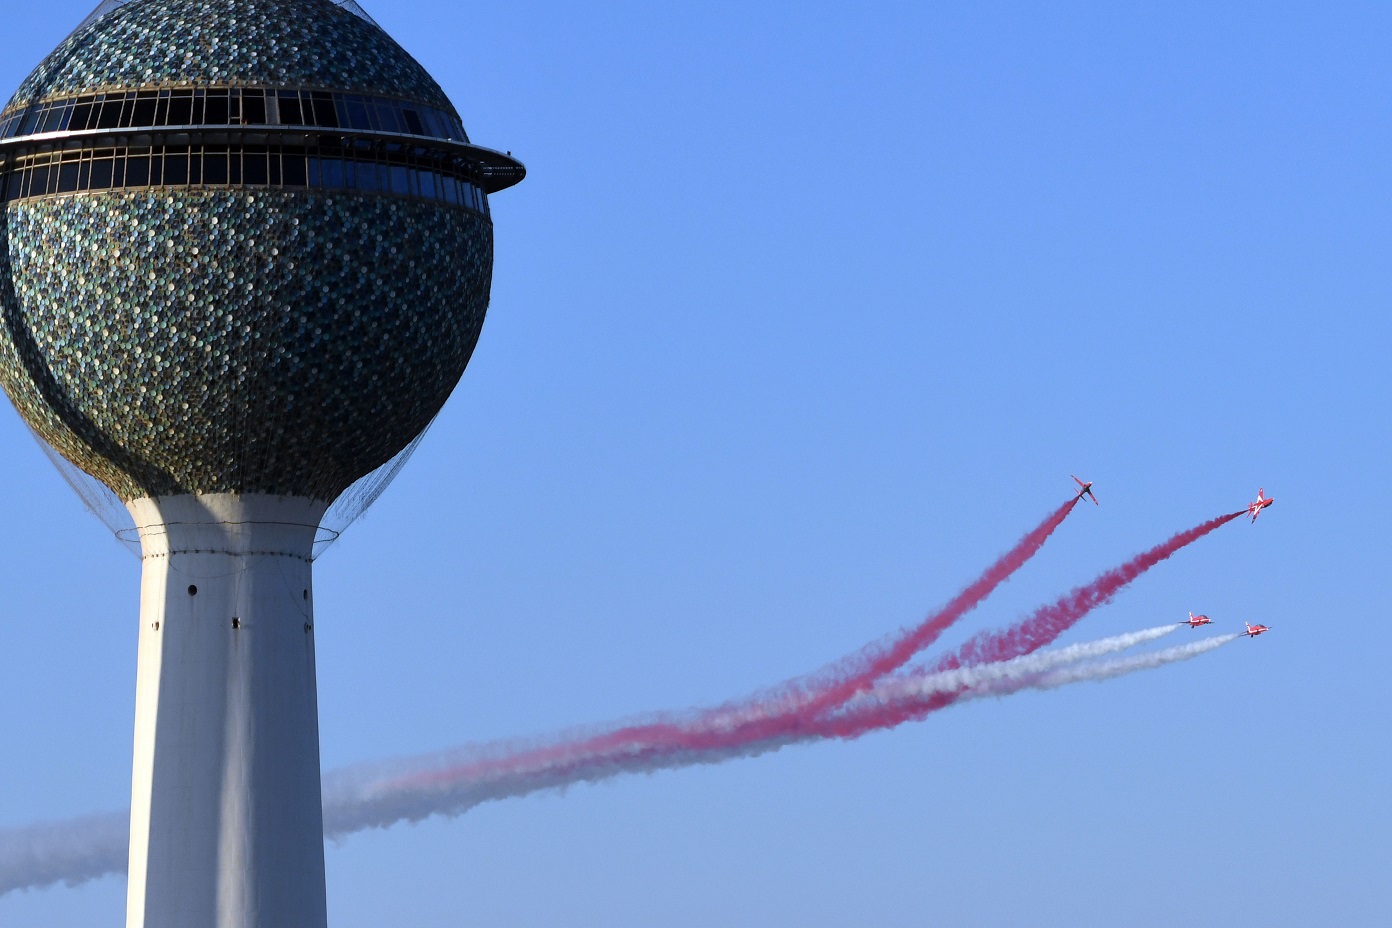 Kuwait air force and the British Royal air force's "Red Arrows" perform air show in Kuwait